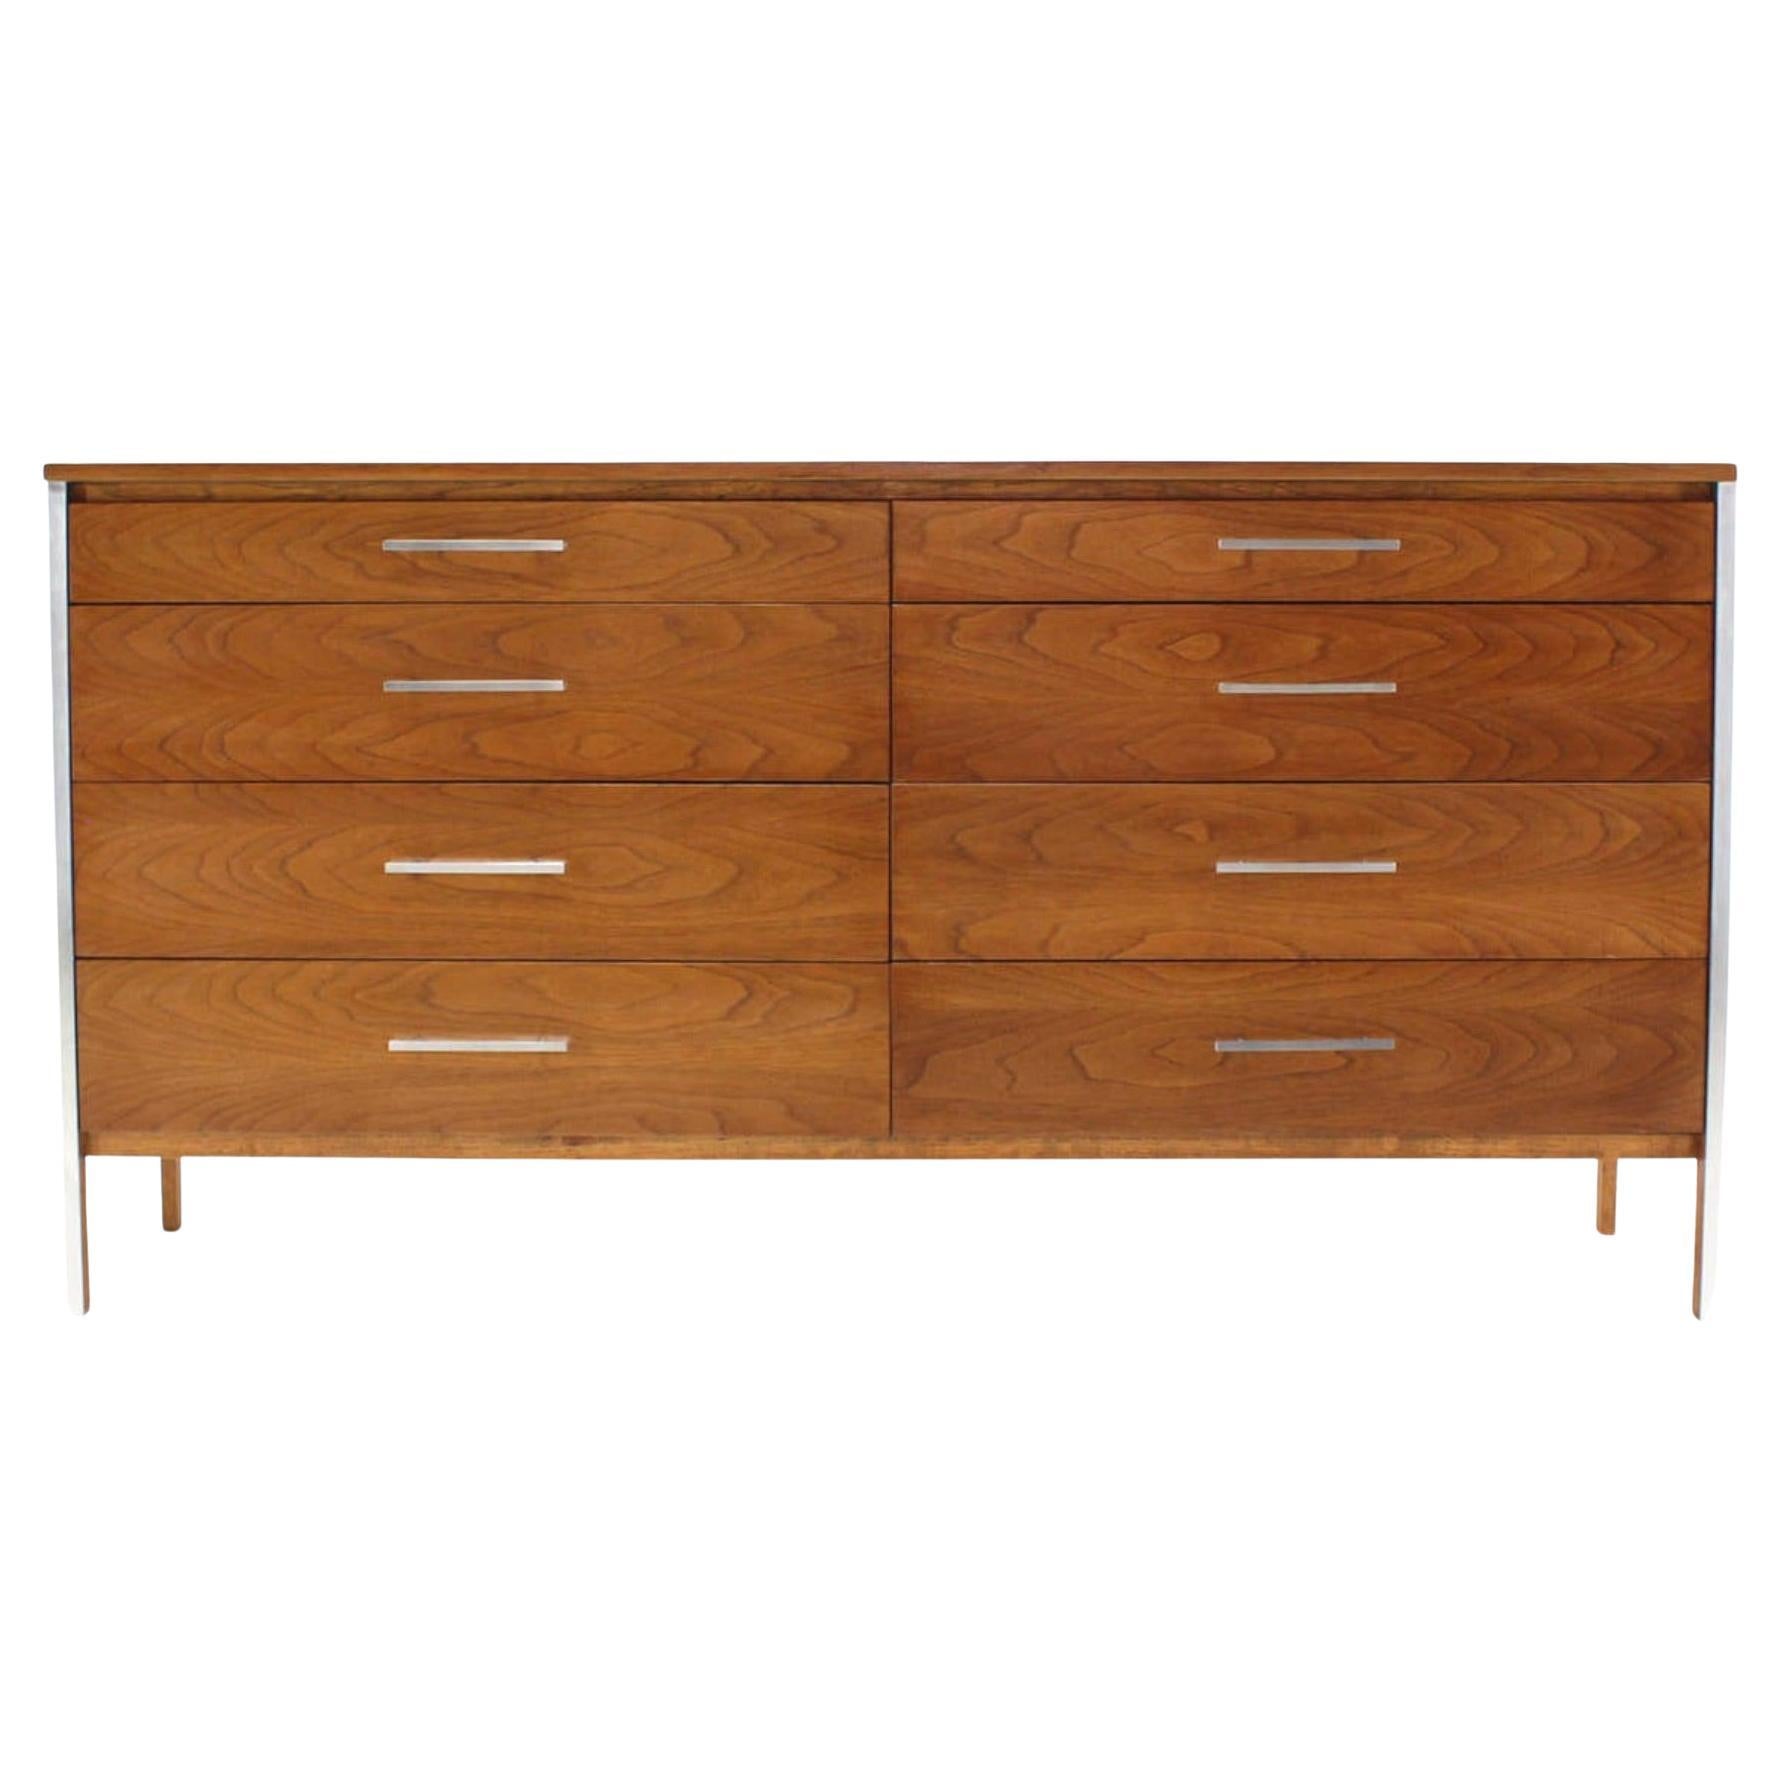 Paul McCobb for Calvin Double Long Dresser Credenza Cabinet For Sale